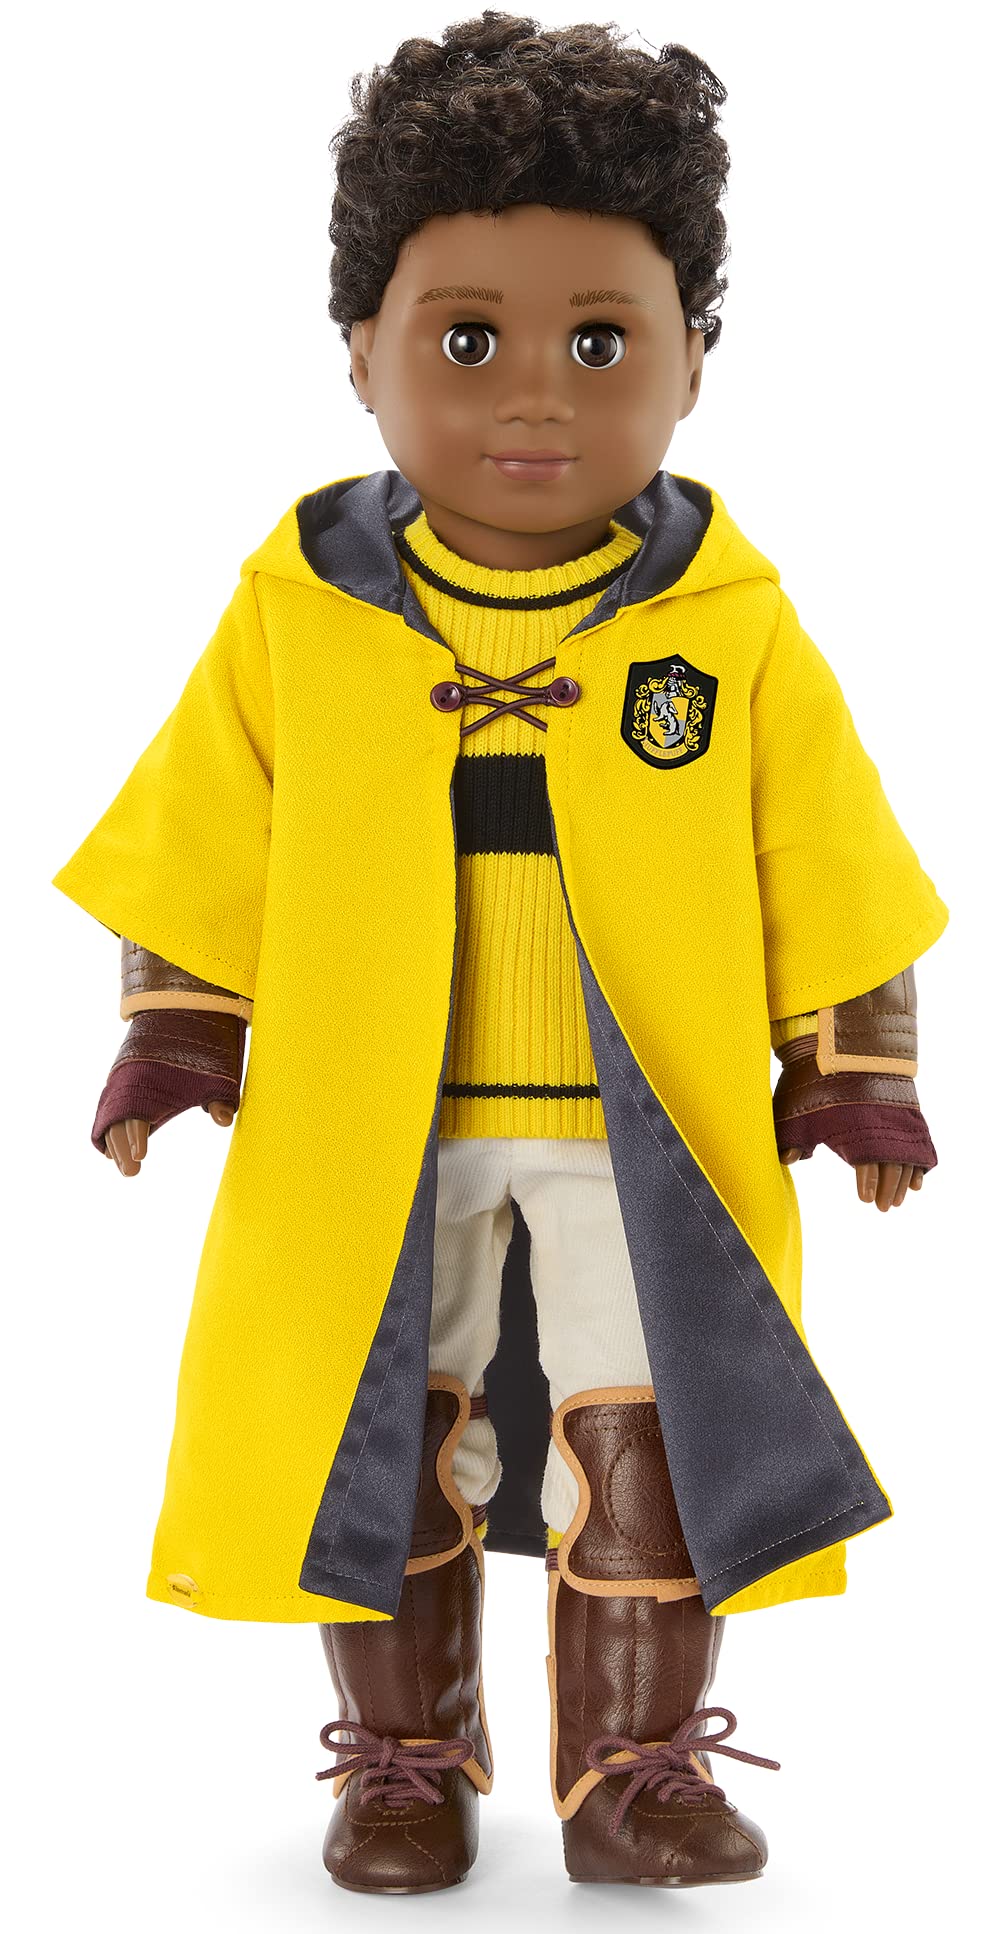 American Girl Harry Potter 18-inch Doll Hufflepuff Quidditch Uniform Outfit with Robe Featuring House Crest, For Ages 6+